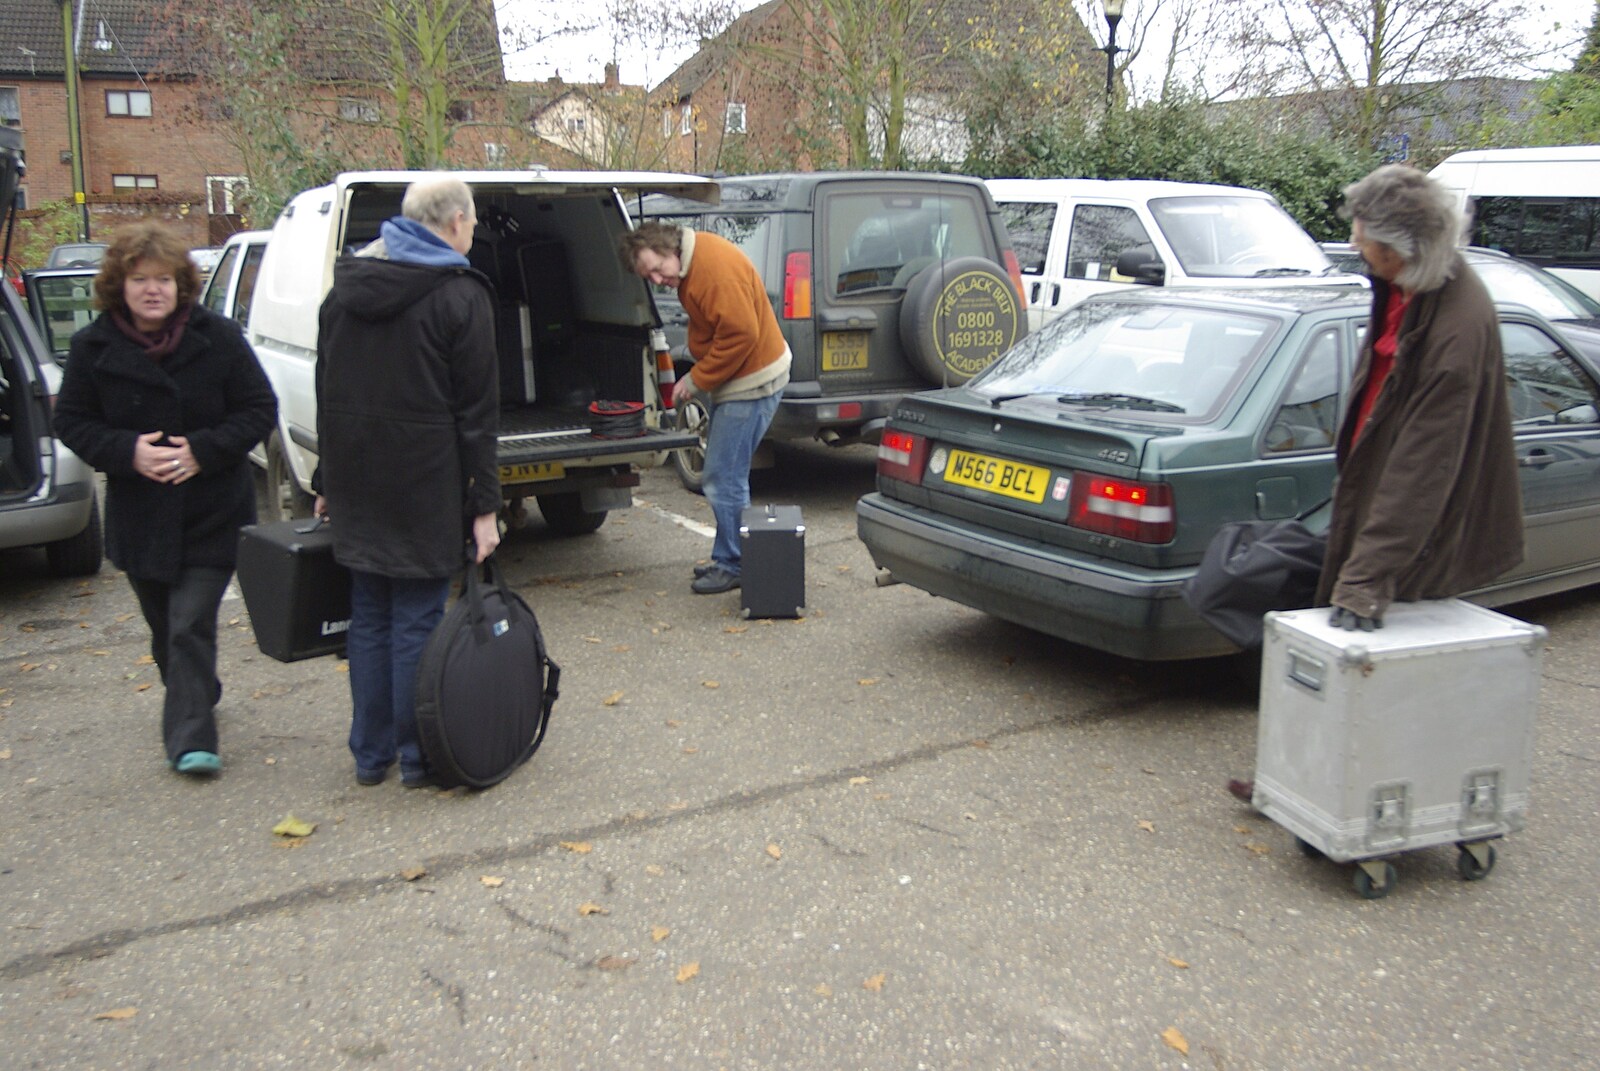 The BBs On Tour, Gatwick Copthorne, West Sussex - 24th November 2007: Max's van gets filled up too